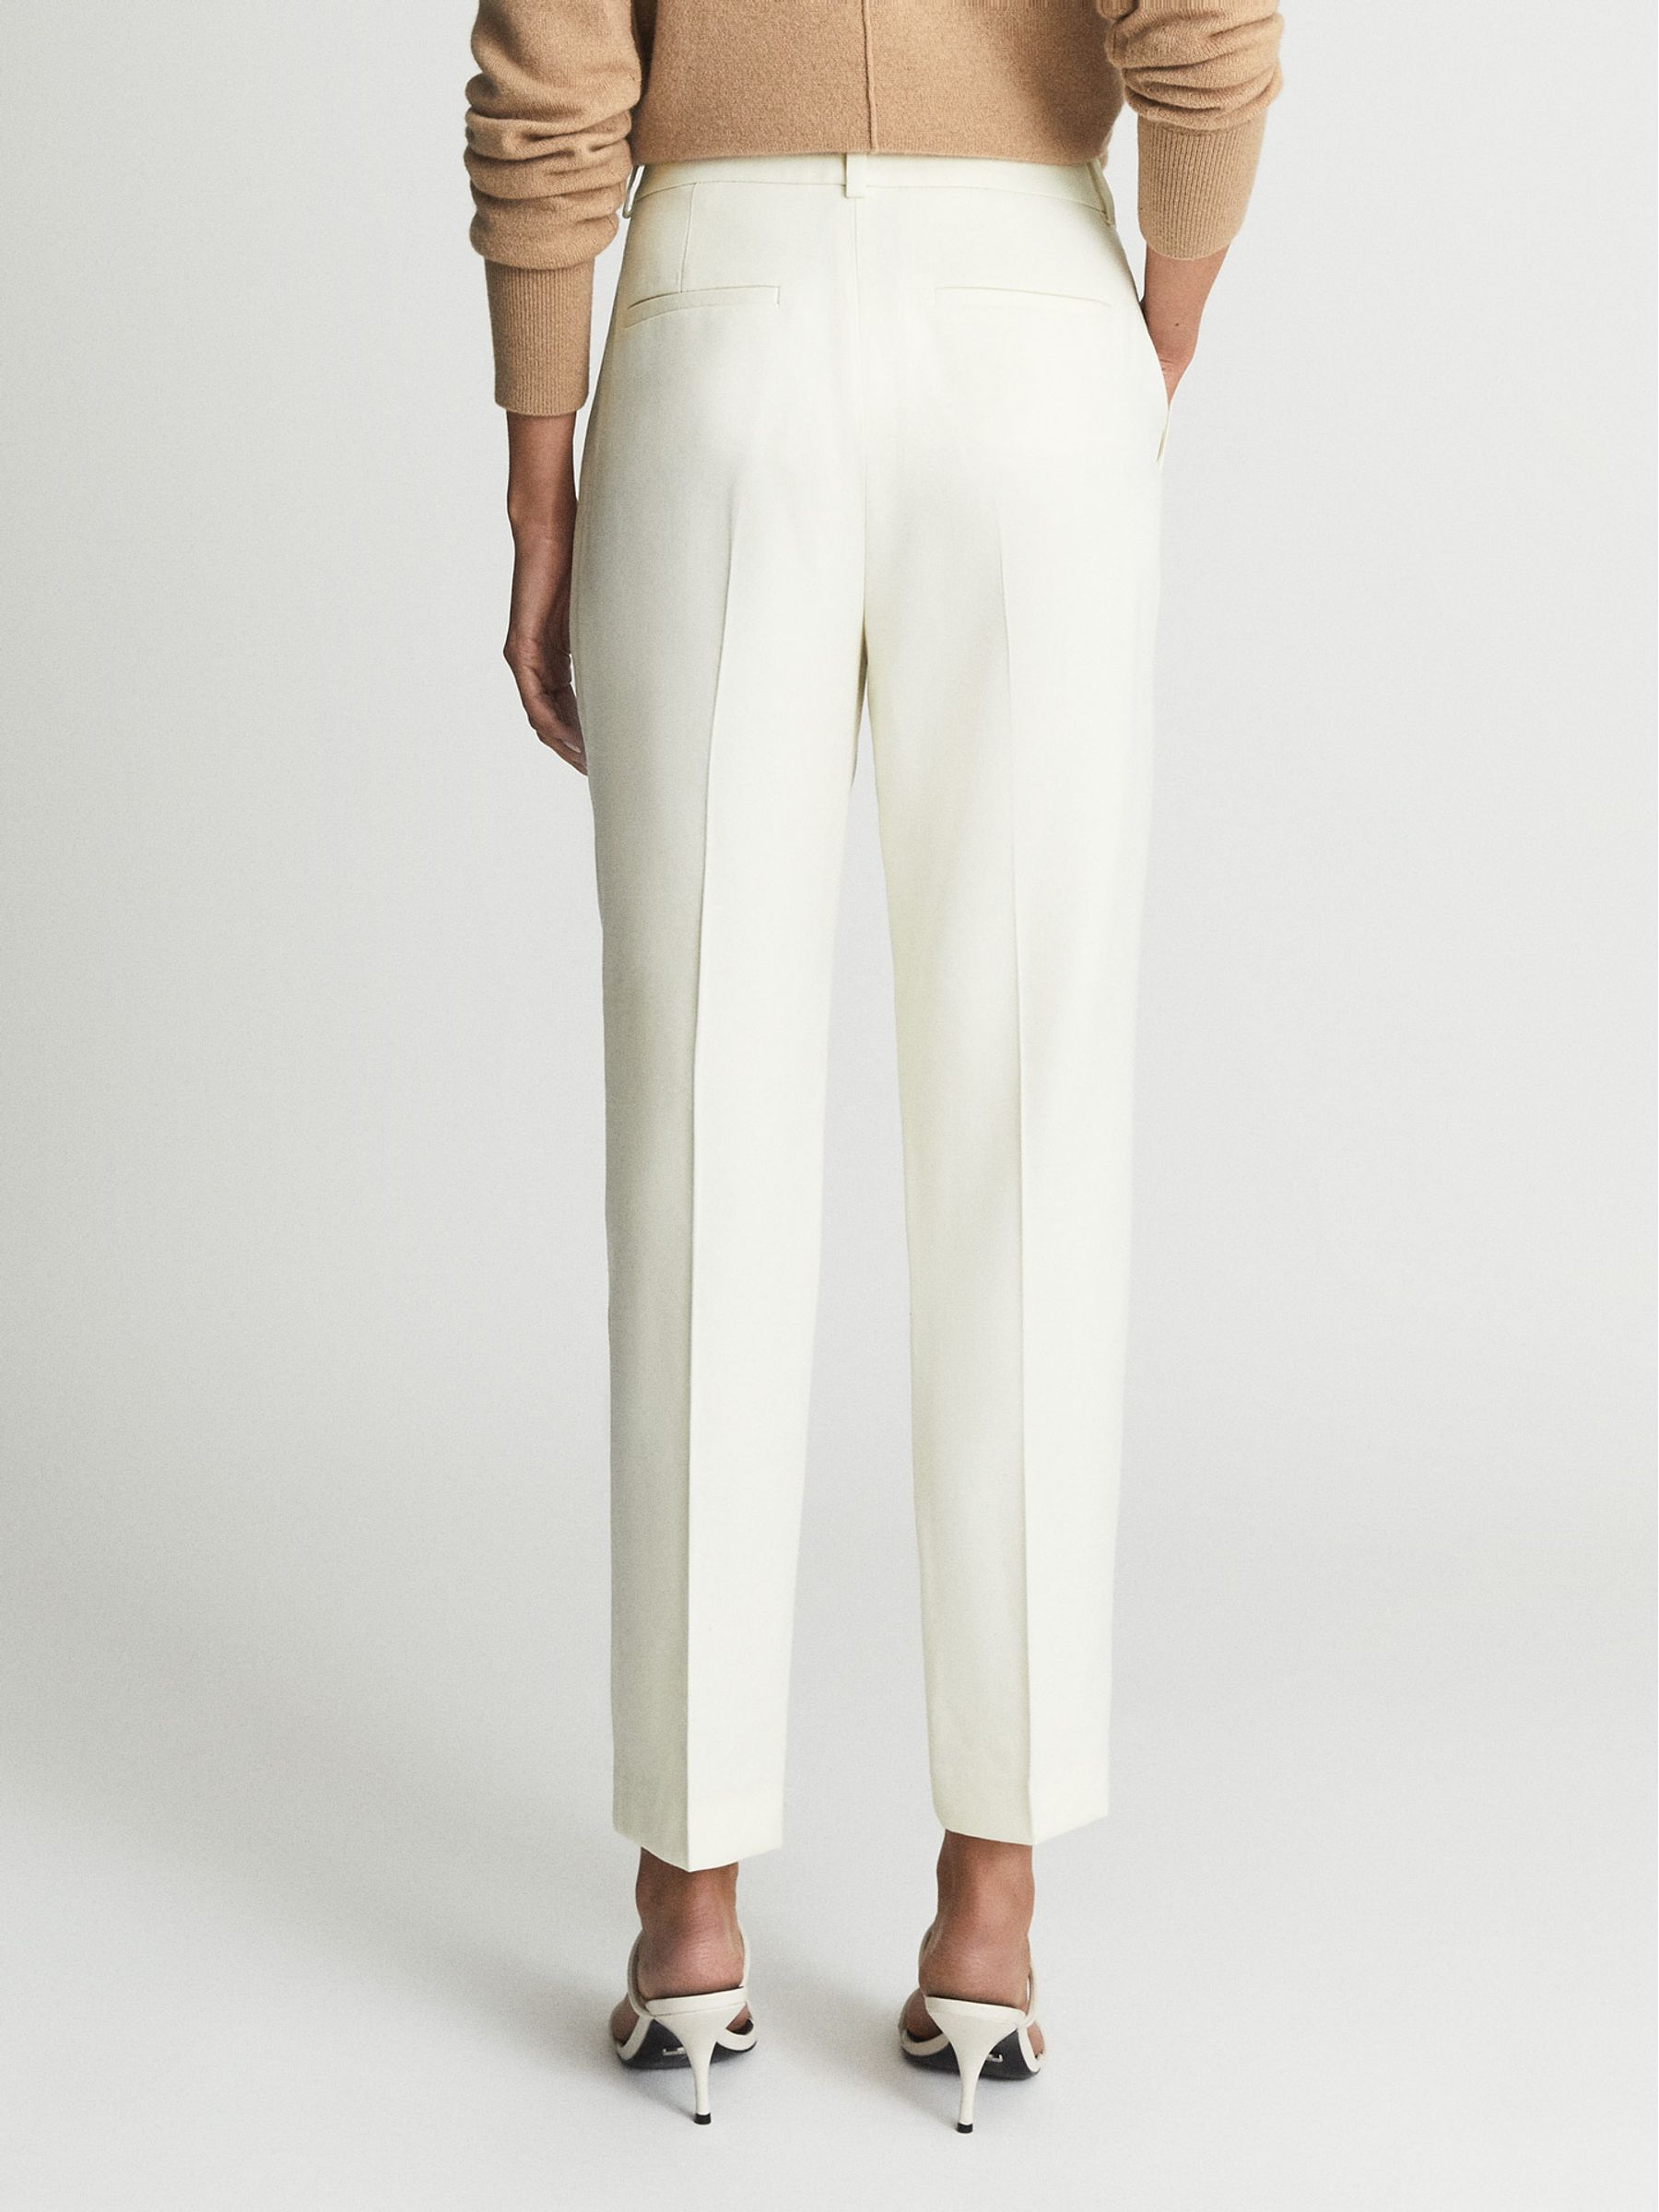 Reiss Etna Flared Tailored Trousers - REISS